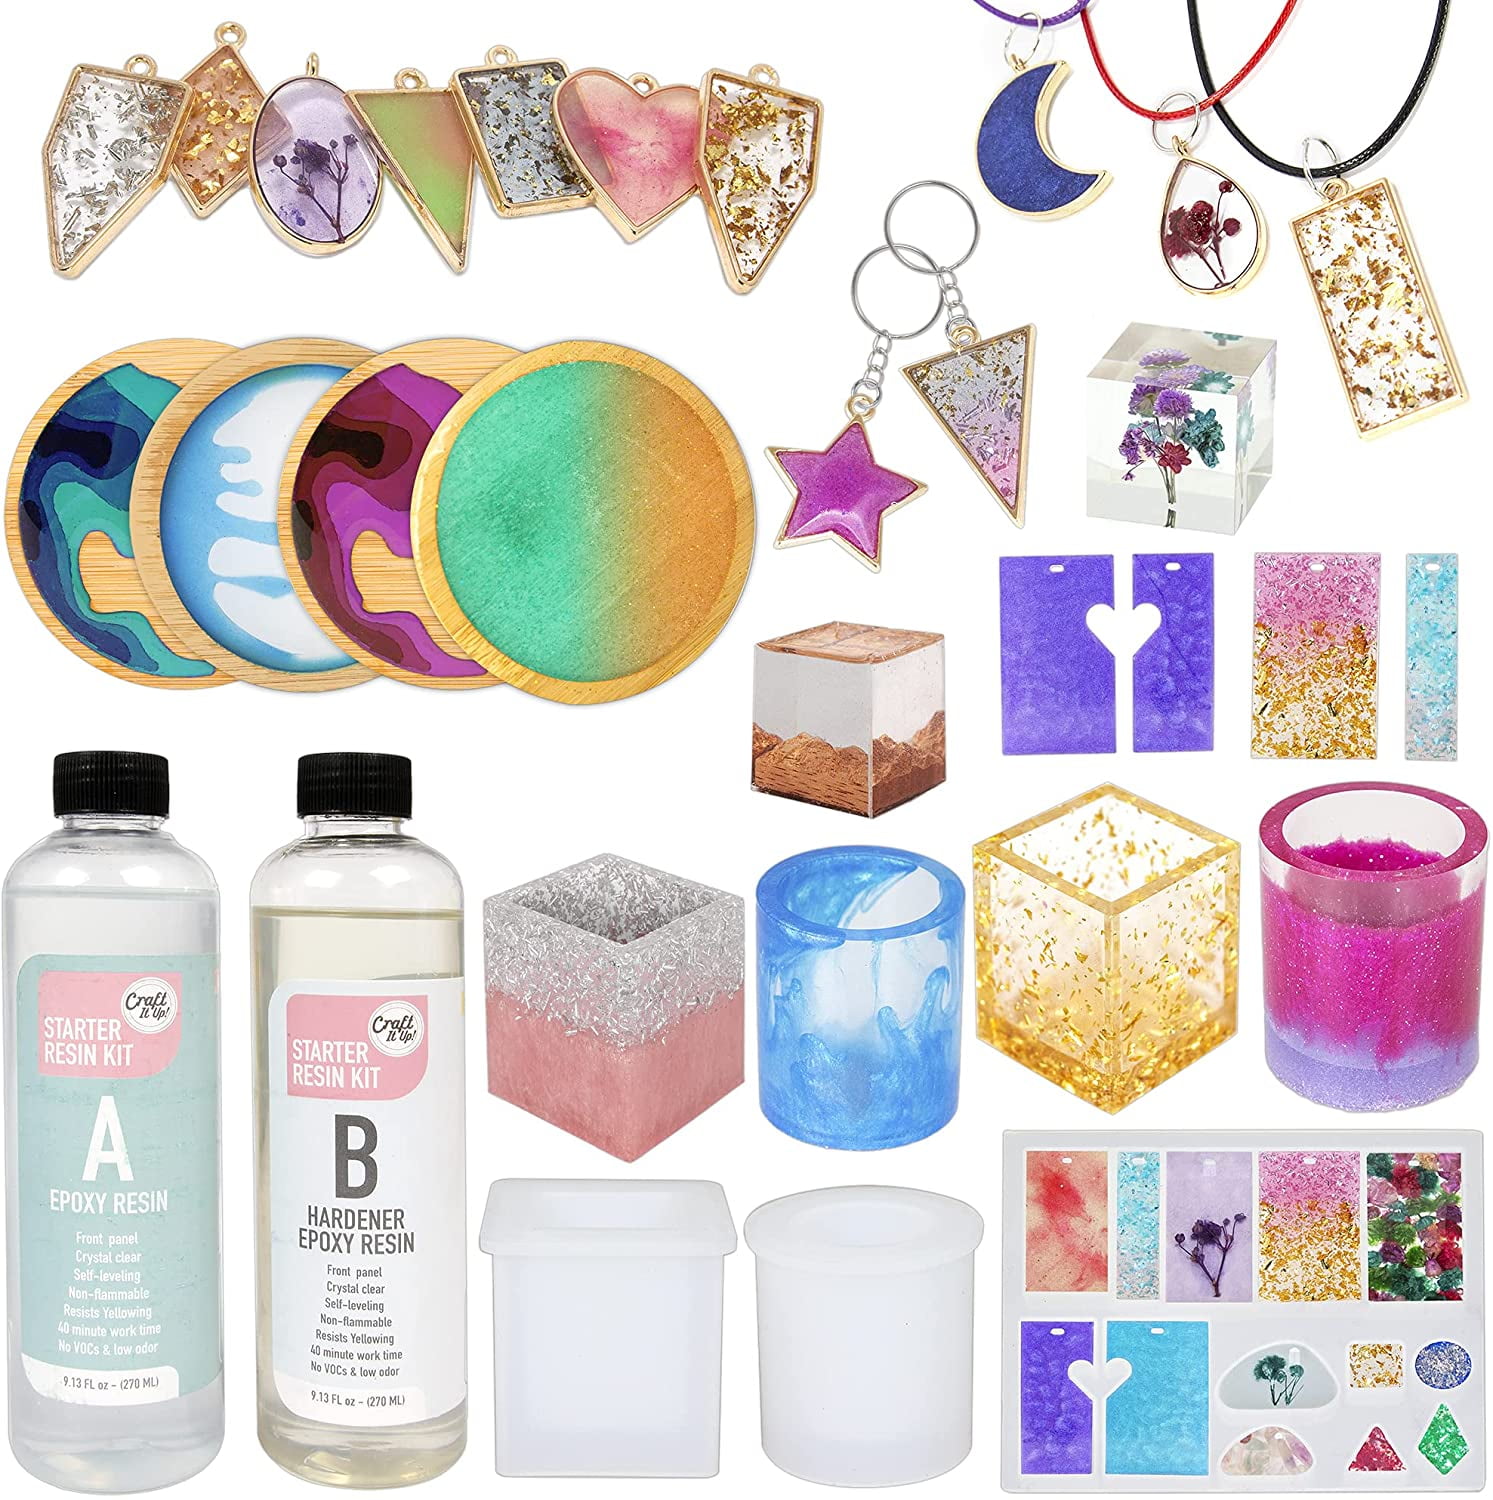 Best Resin Jewelry Starter Kit - all the supplies to get started! – Little  Windows Brilliant Resin and Supplies